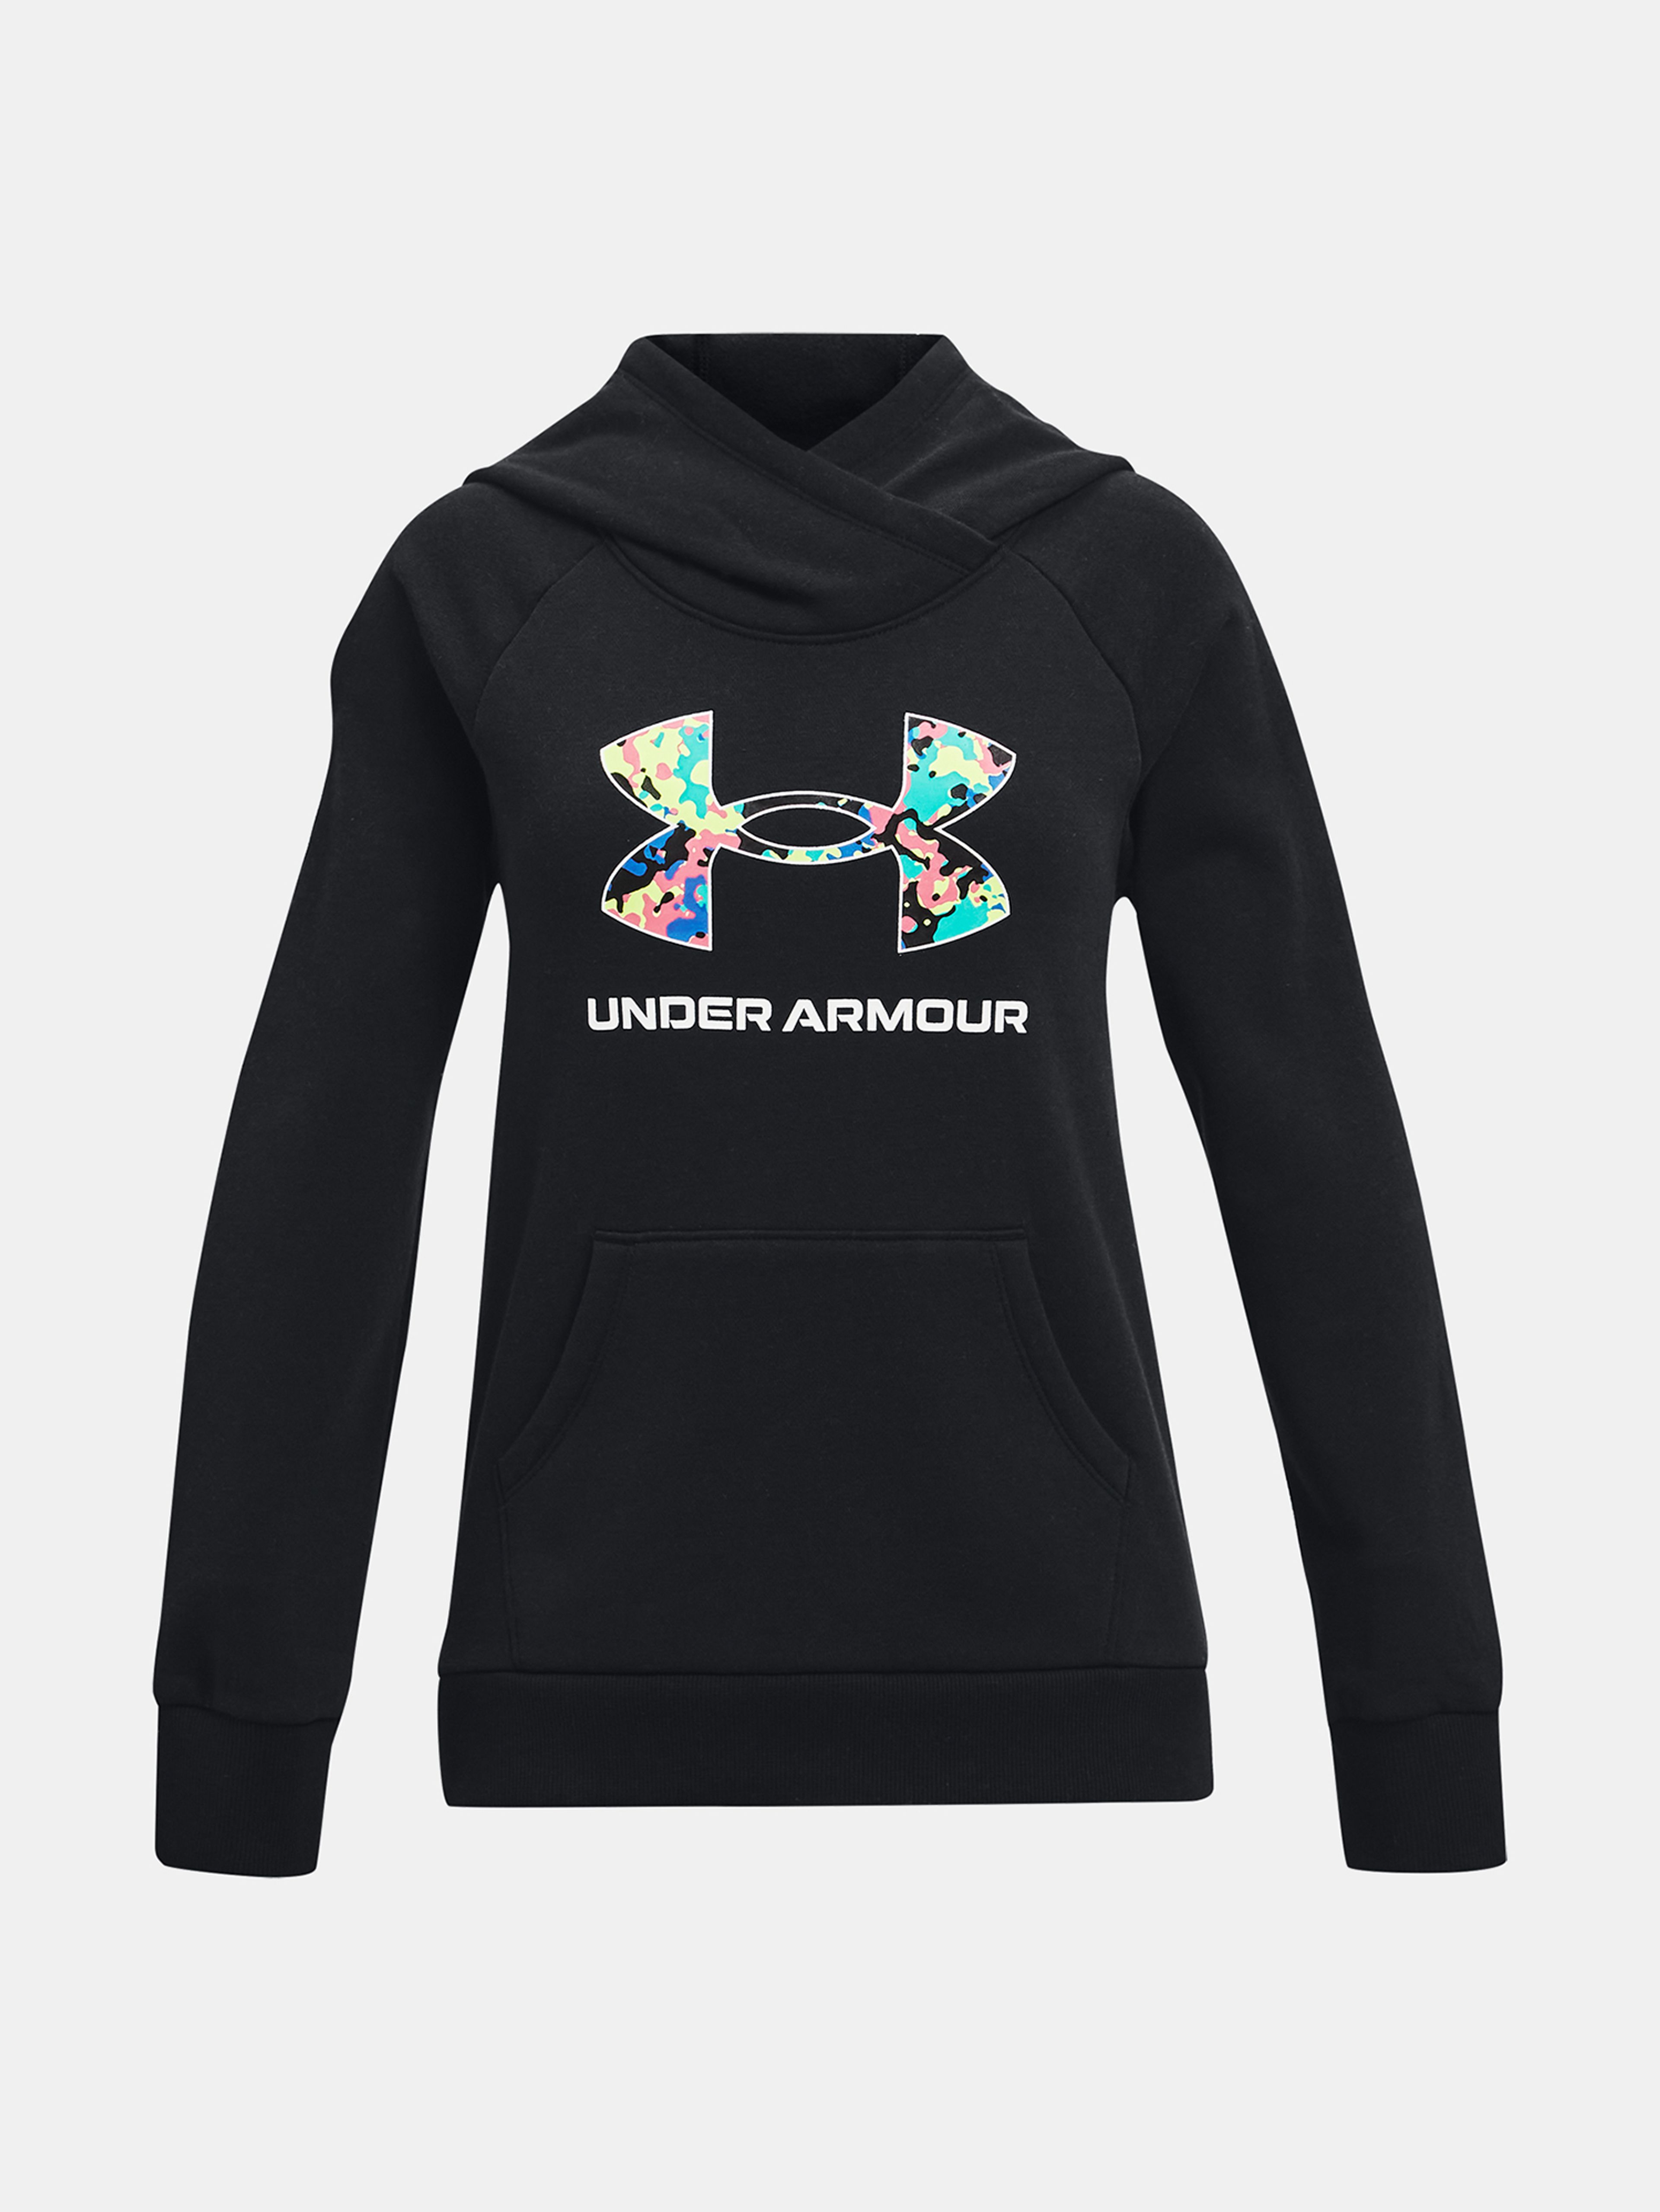 Mikina Under Armour Rival Logo Hoodie-BLK